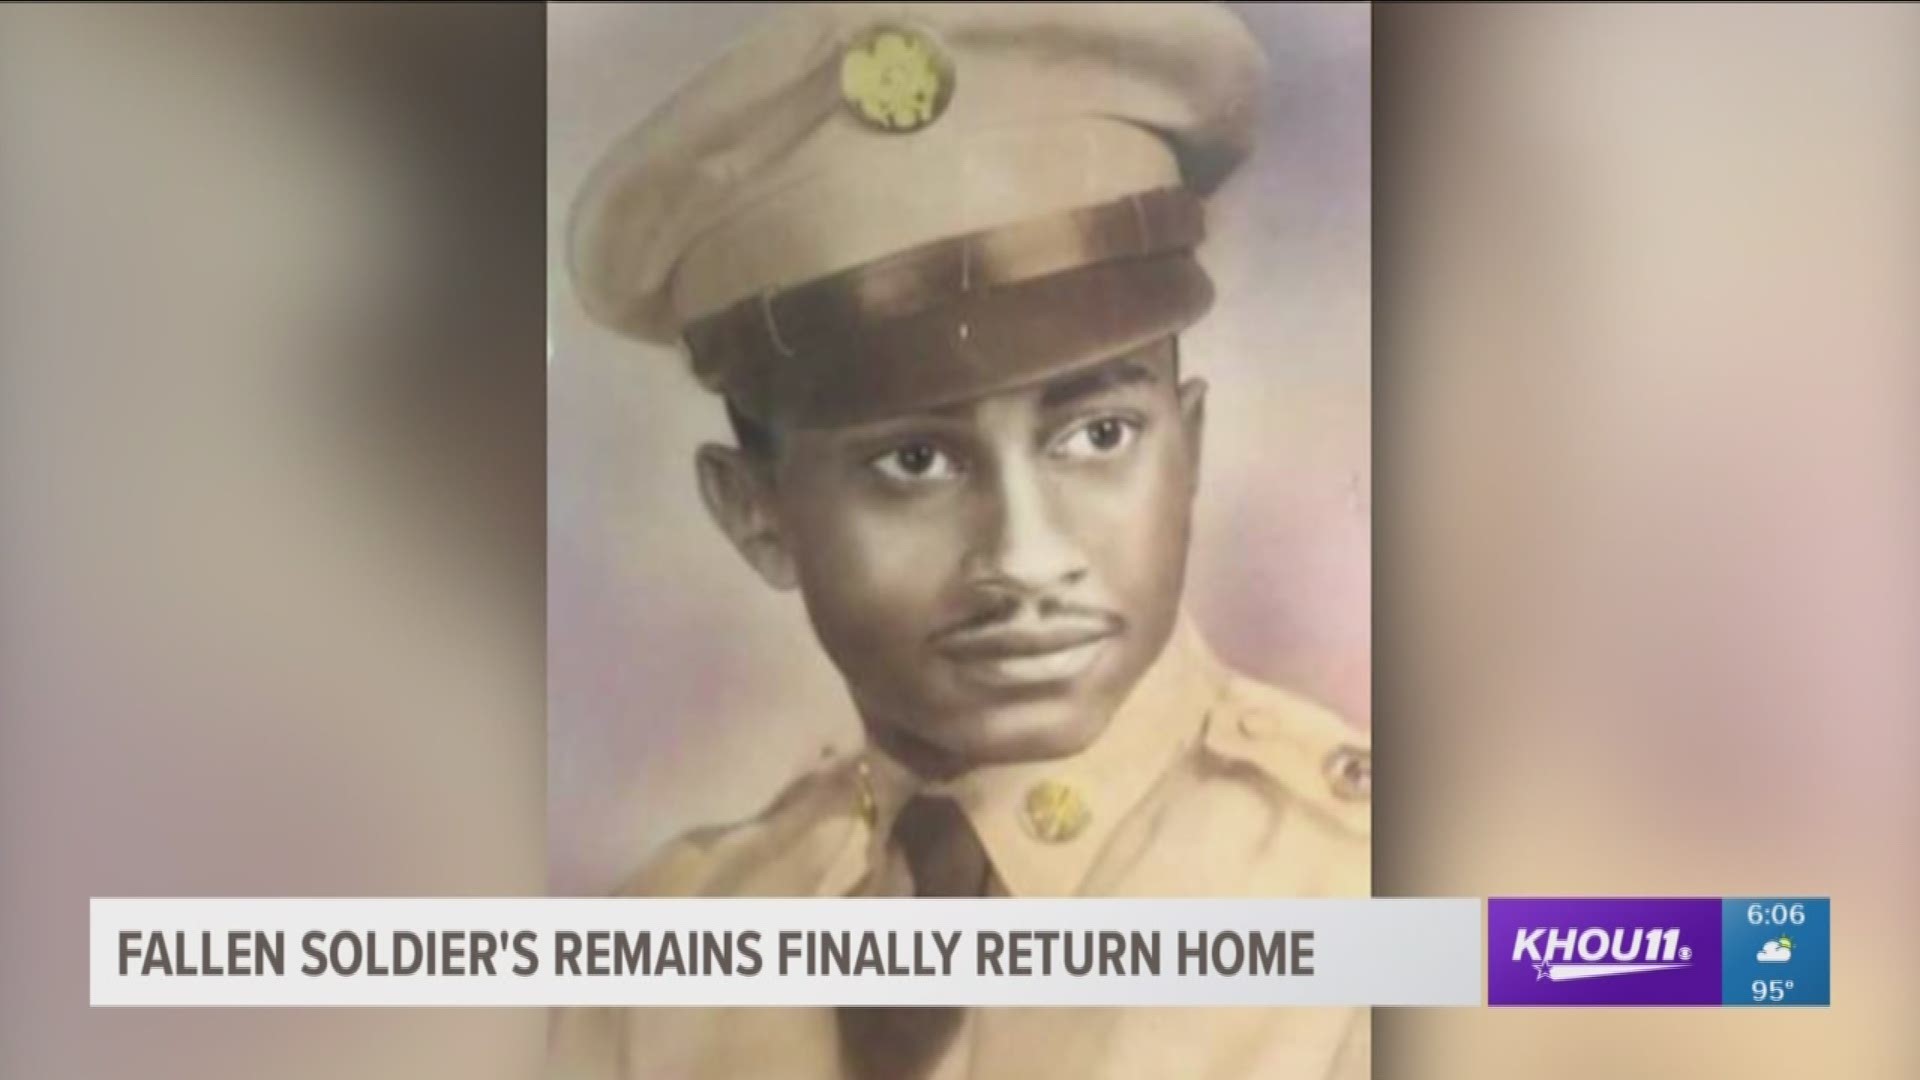 The remains of a Korean War veteran arrived at Bush Airport in Houston on Tuesday and family members, an Honor Guard and several branches of the military met on the tarmac to welcome him home.